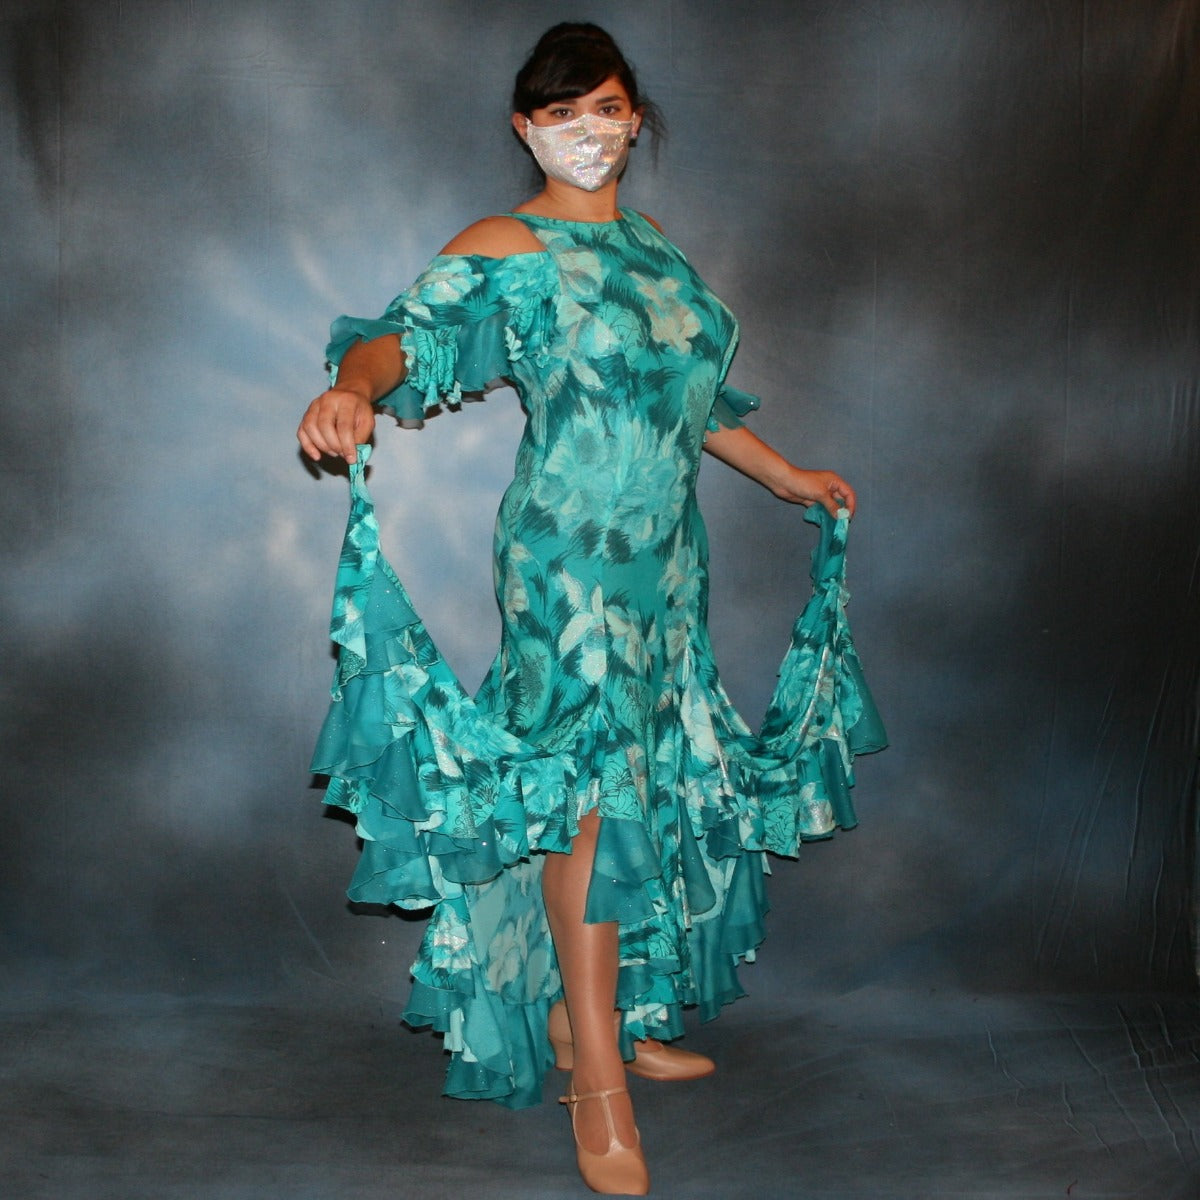 Crystal's Creations Gorgeous teal tropical print social ballroom dress created in tropical lycra print in shades of teal with a bit of silver sheen accents...absolutely gorgeous fabric! This social ballroom dress features very full skirting with 2 slits & oodles of flounces of the same teal tropical print lycra with intermittent flounces of teal glitter chiffon...along with draping, cold shoulder flounce sleeves...and a low back